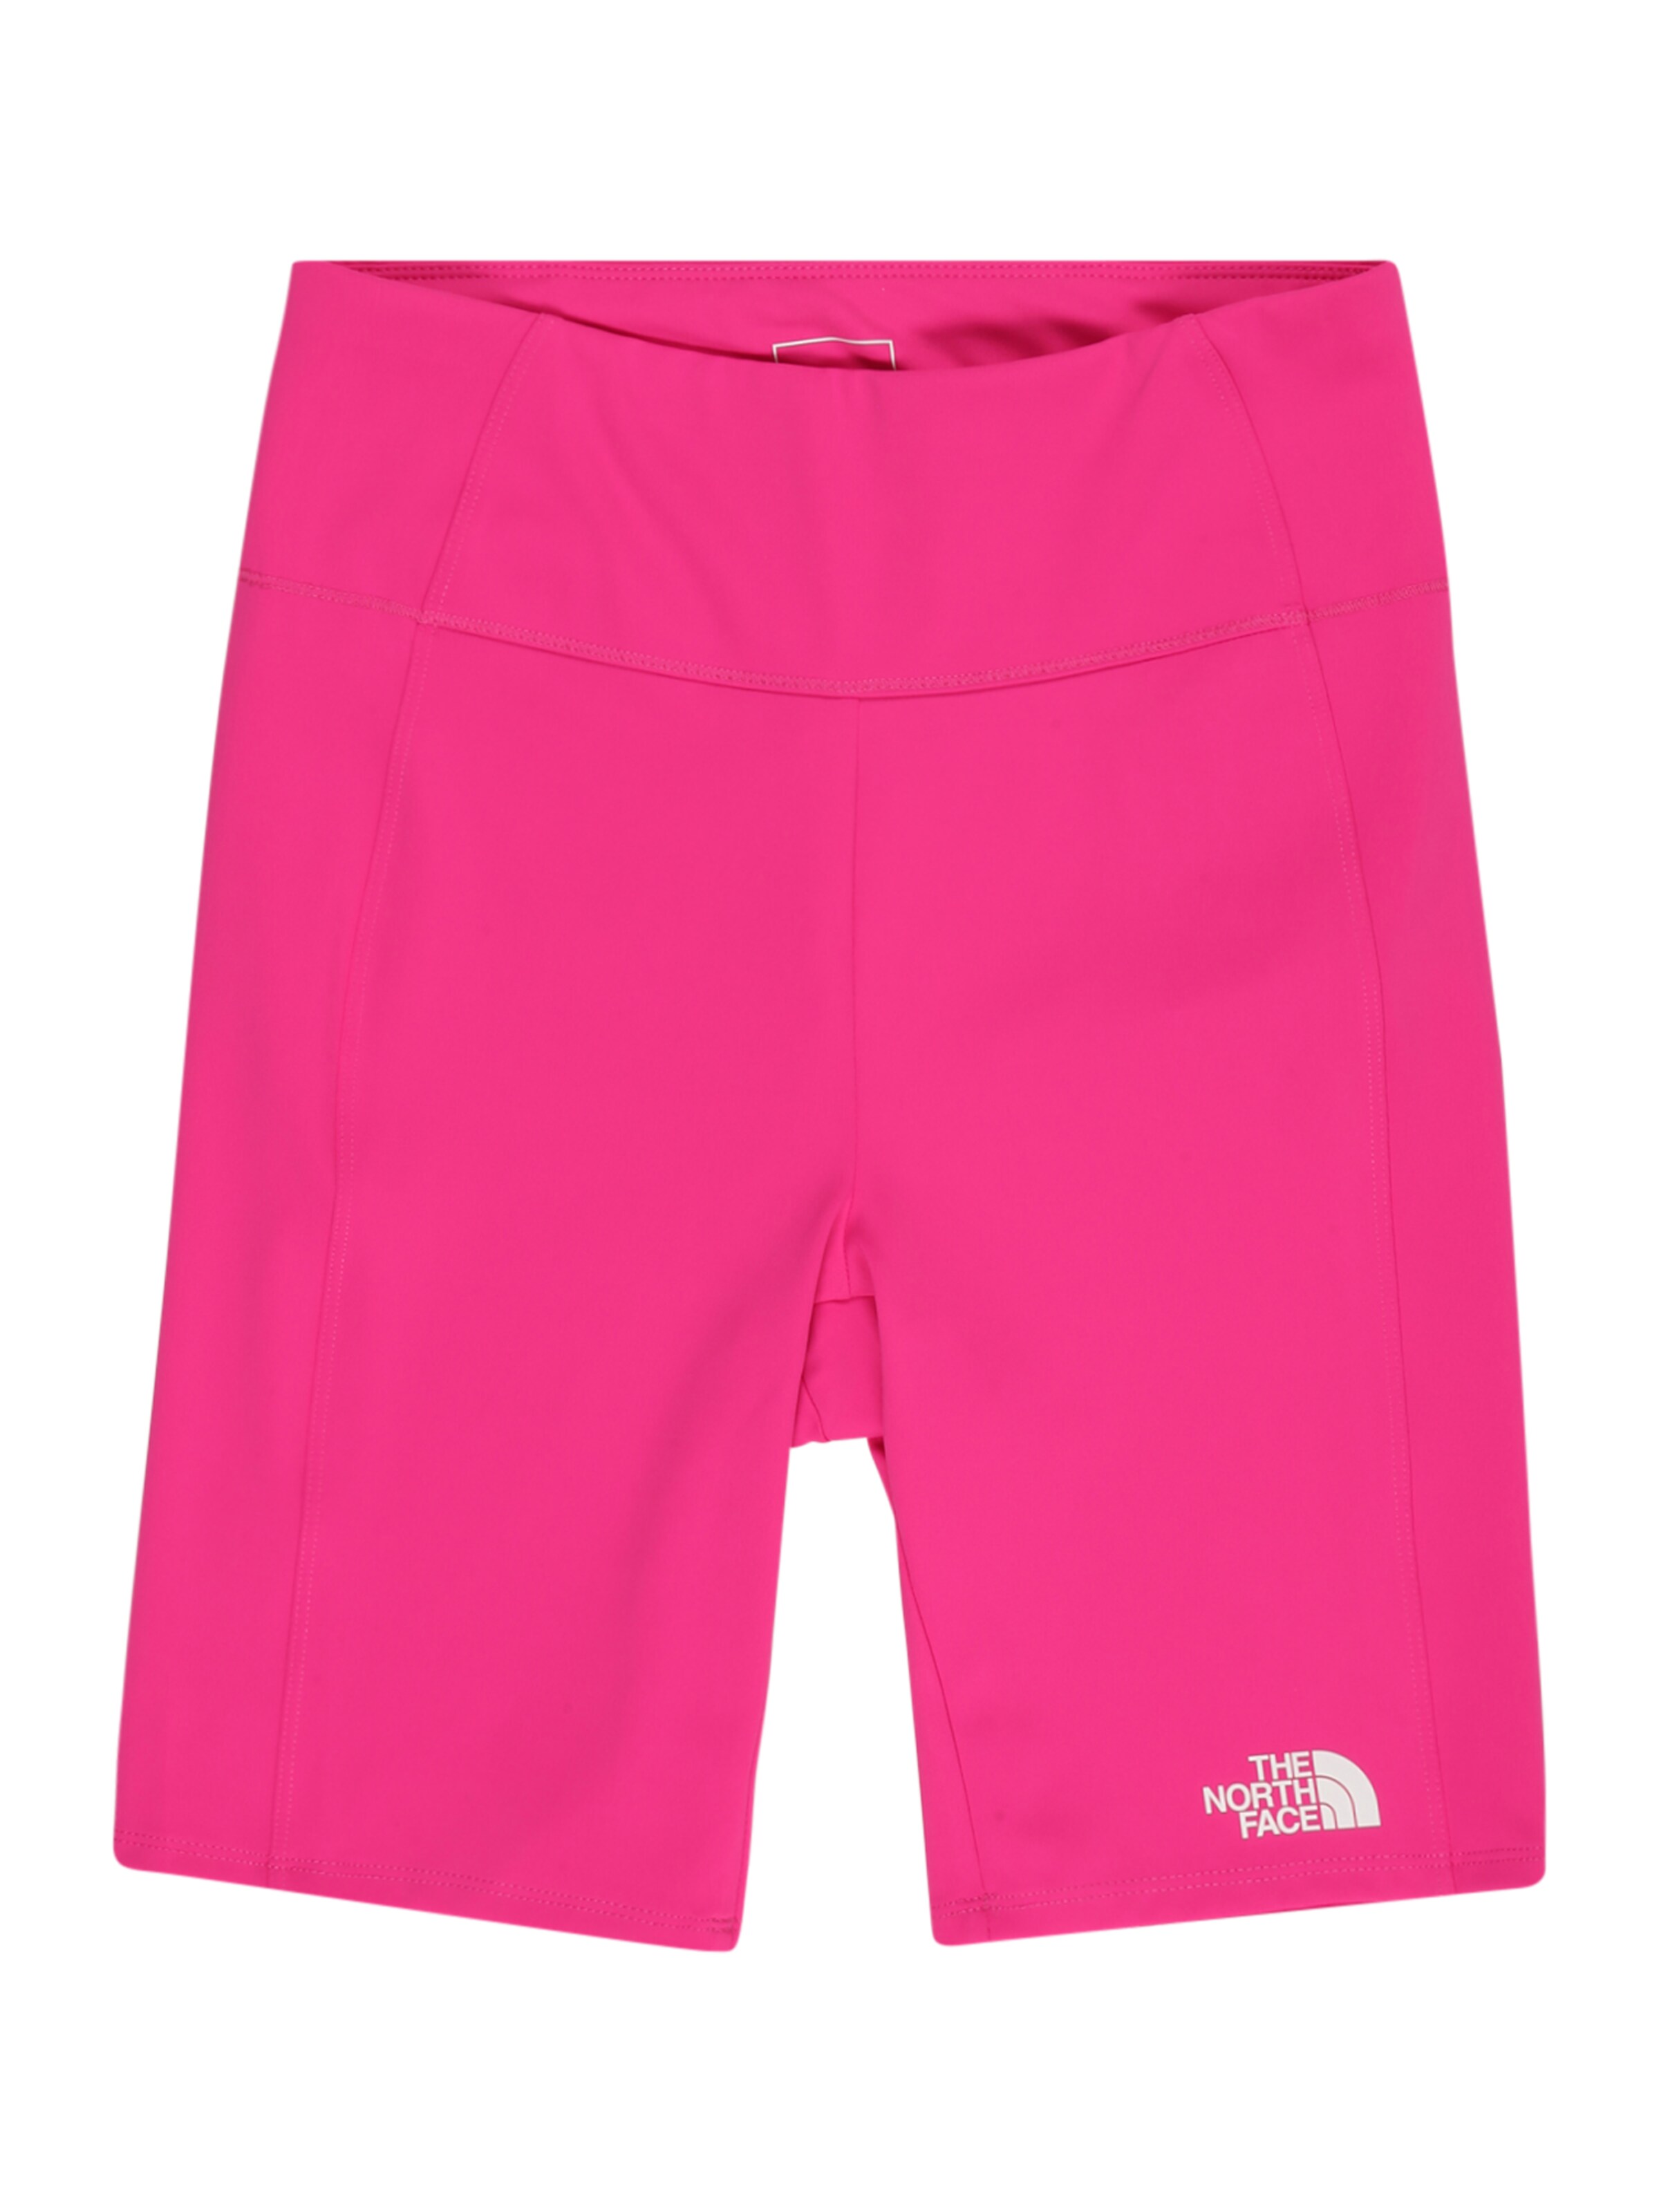 Kinder Teens (Gr. 140-176) THE NORTH FACE Sportshorts 'NEVER STOP' in Pink - PY29630